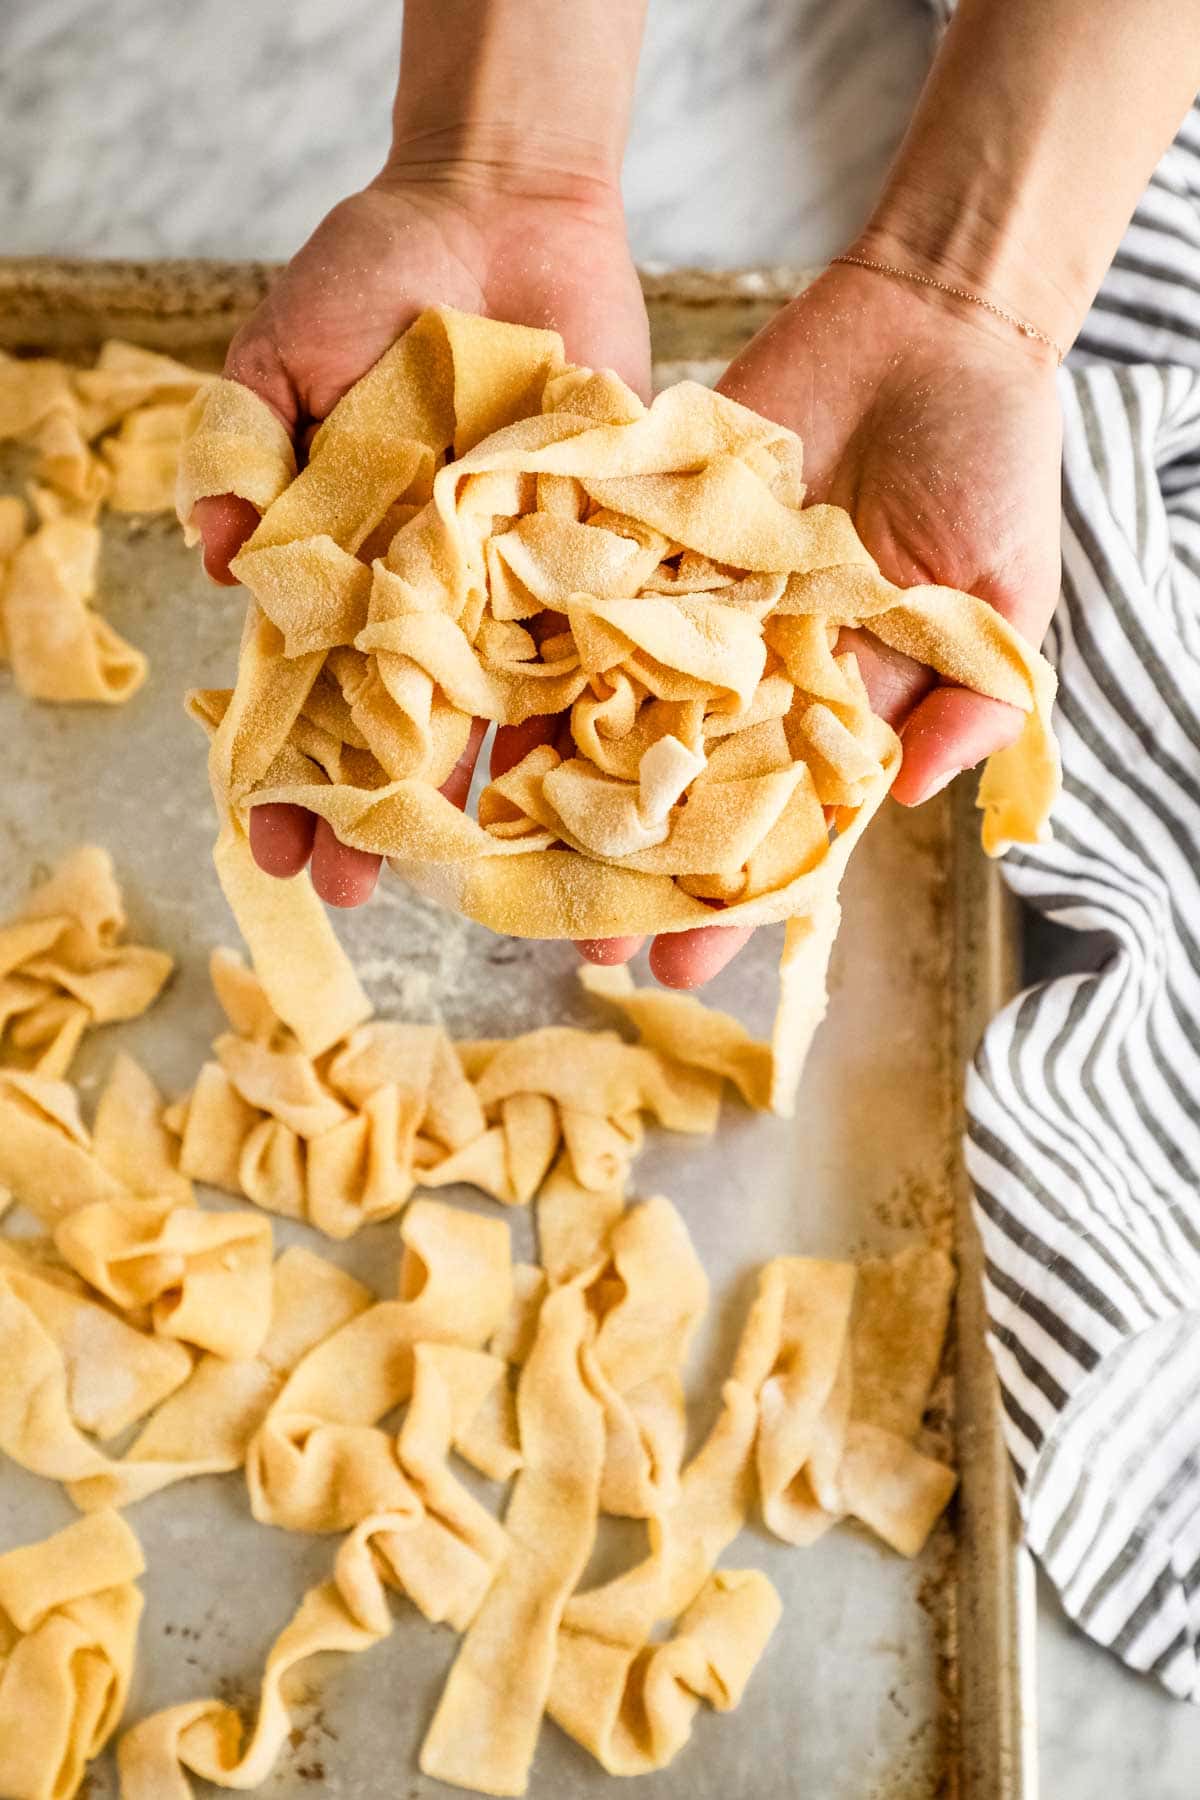 Hands holding homemade pappardelle.